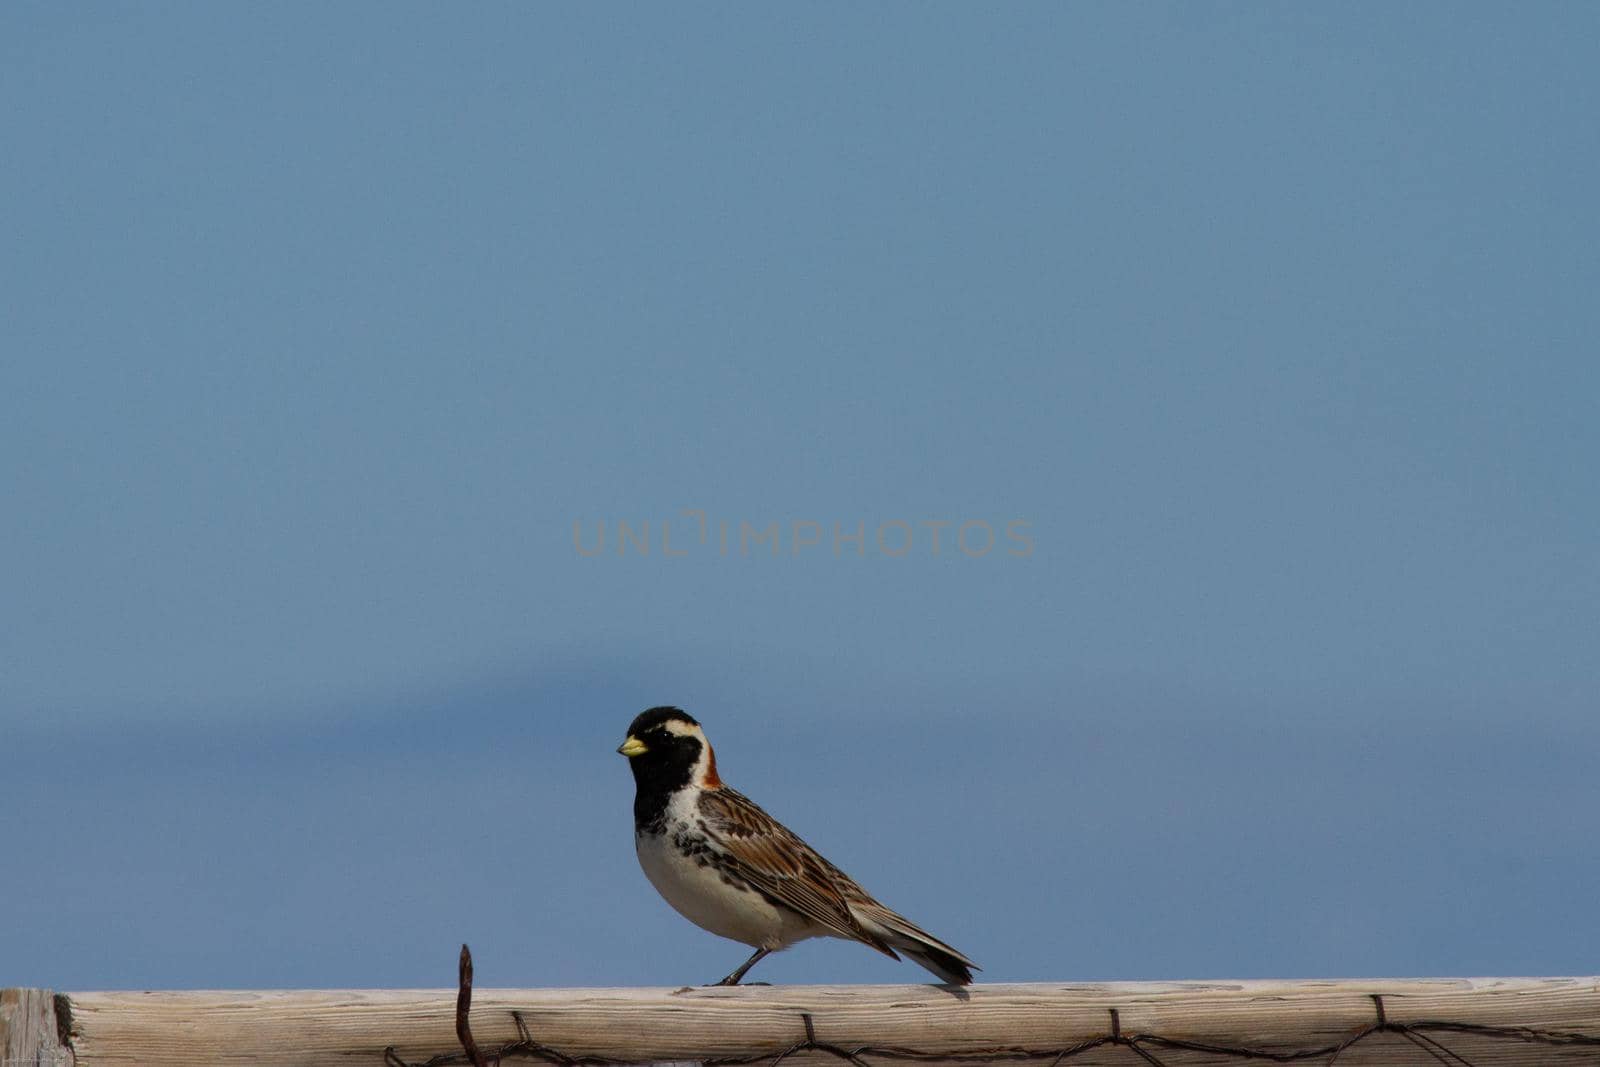 Lapland longspur bird standing on a post with blue skies in the background by Granchinho